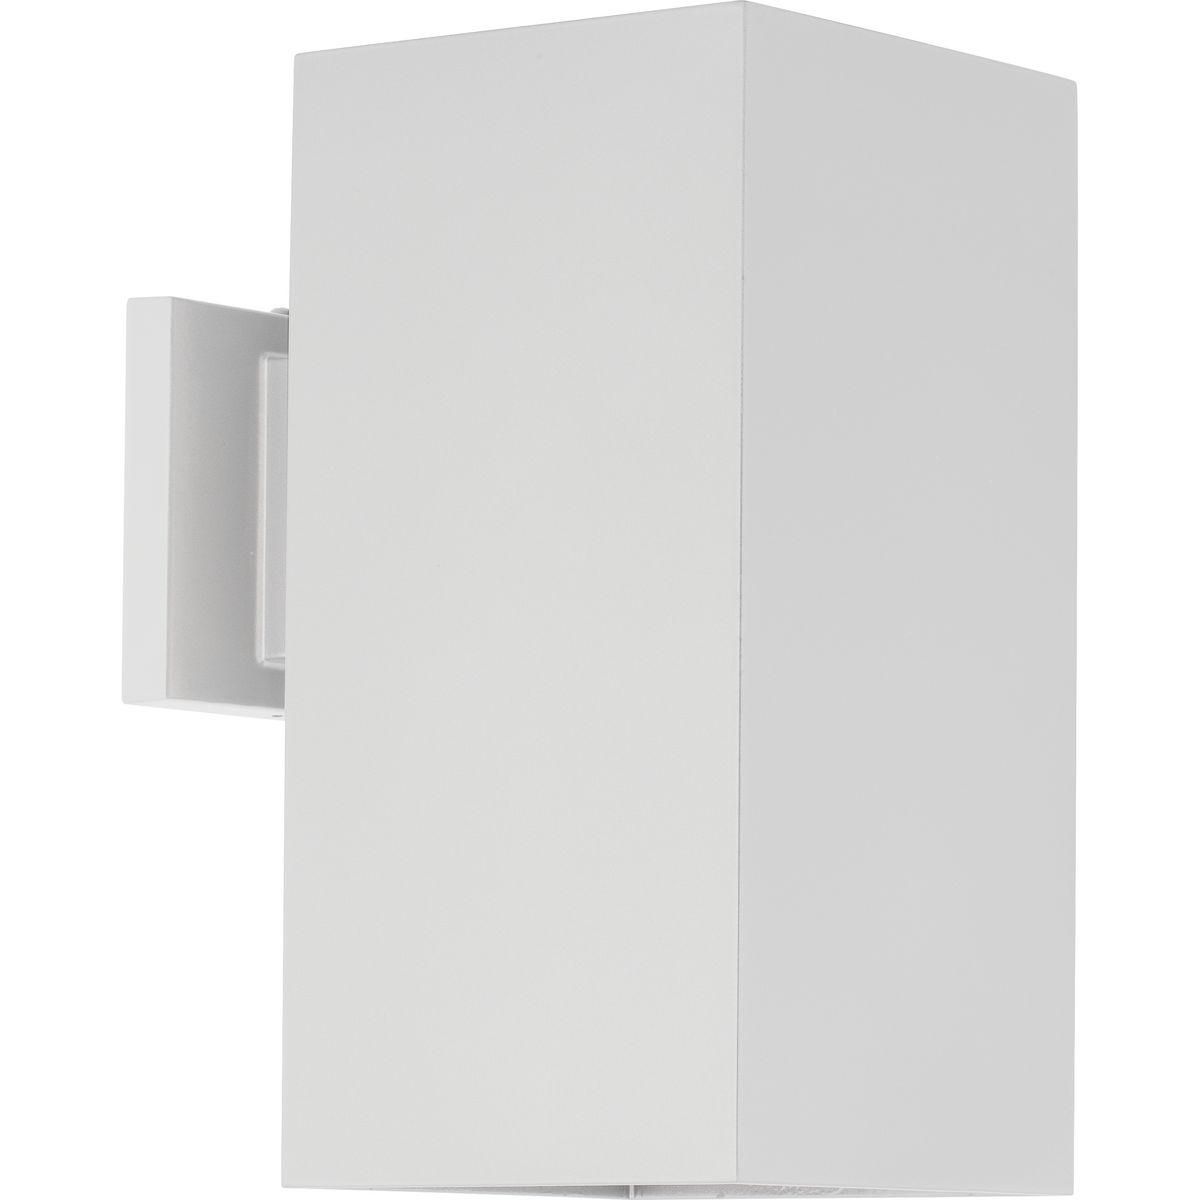 Hubbell P5643-30-30K 6" LED Square Cylinder with heavy-duty aluminum construction, die-cast aluminum wall bracket. UL listed for wet locations. Powder coat for chipping and fading resistance. Dark Sky compliant for down light only. The P5643 is ideal for indoor/outdoor applic